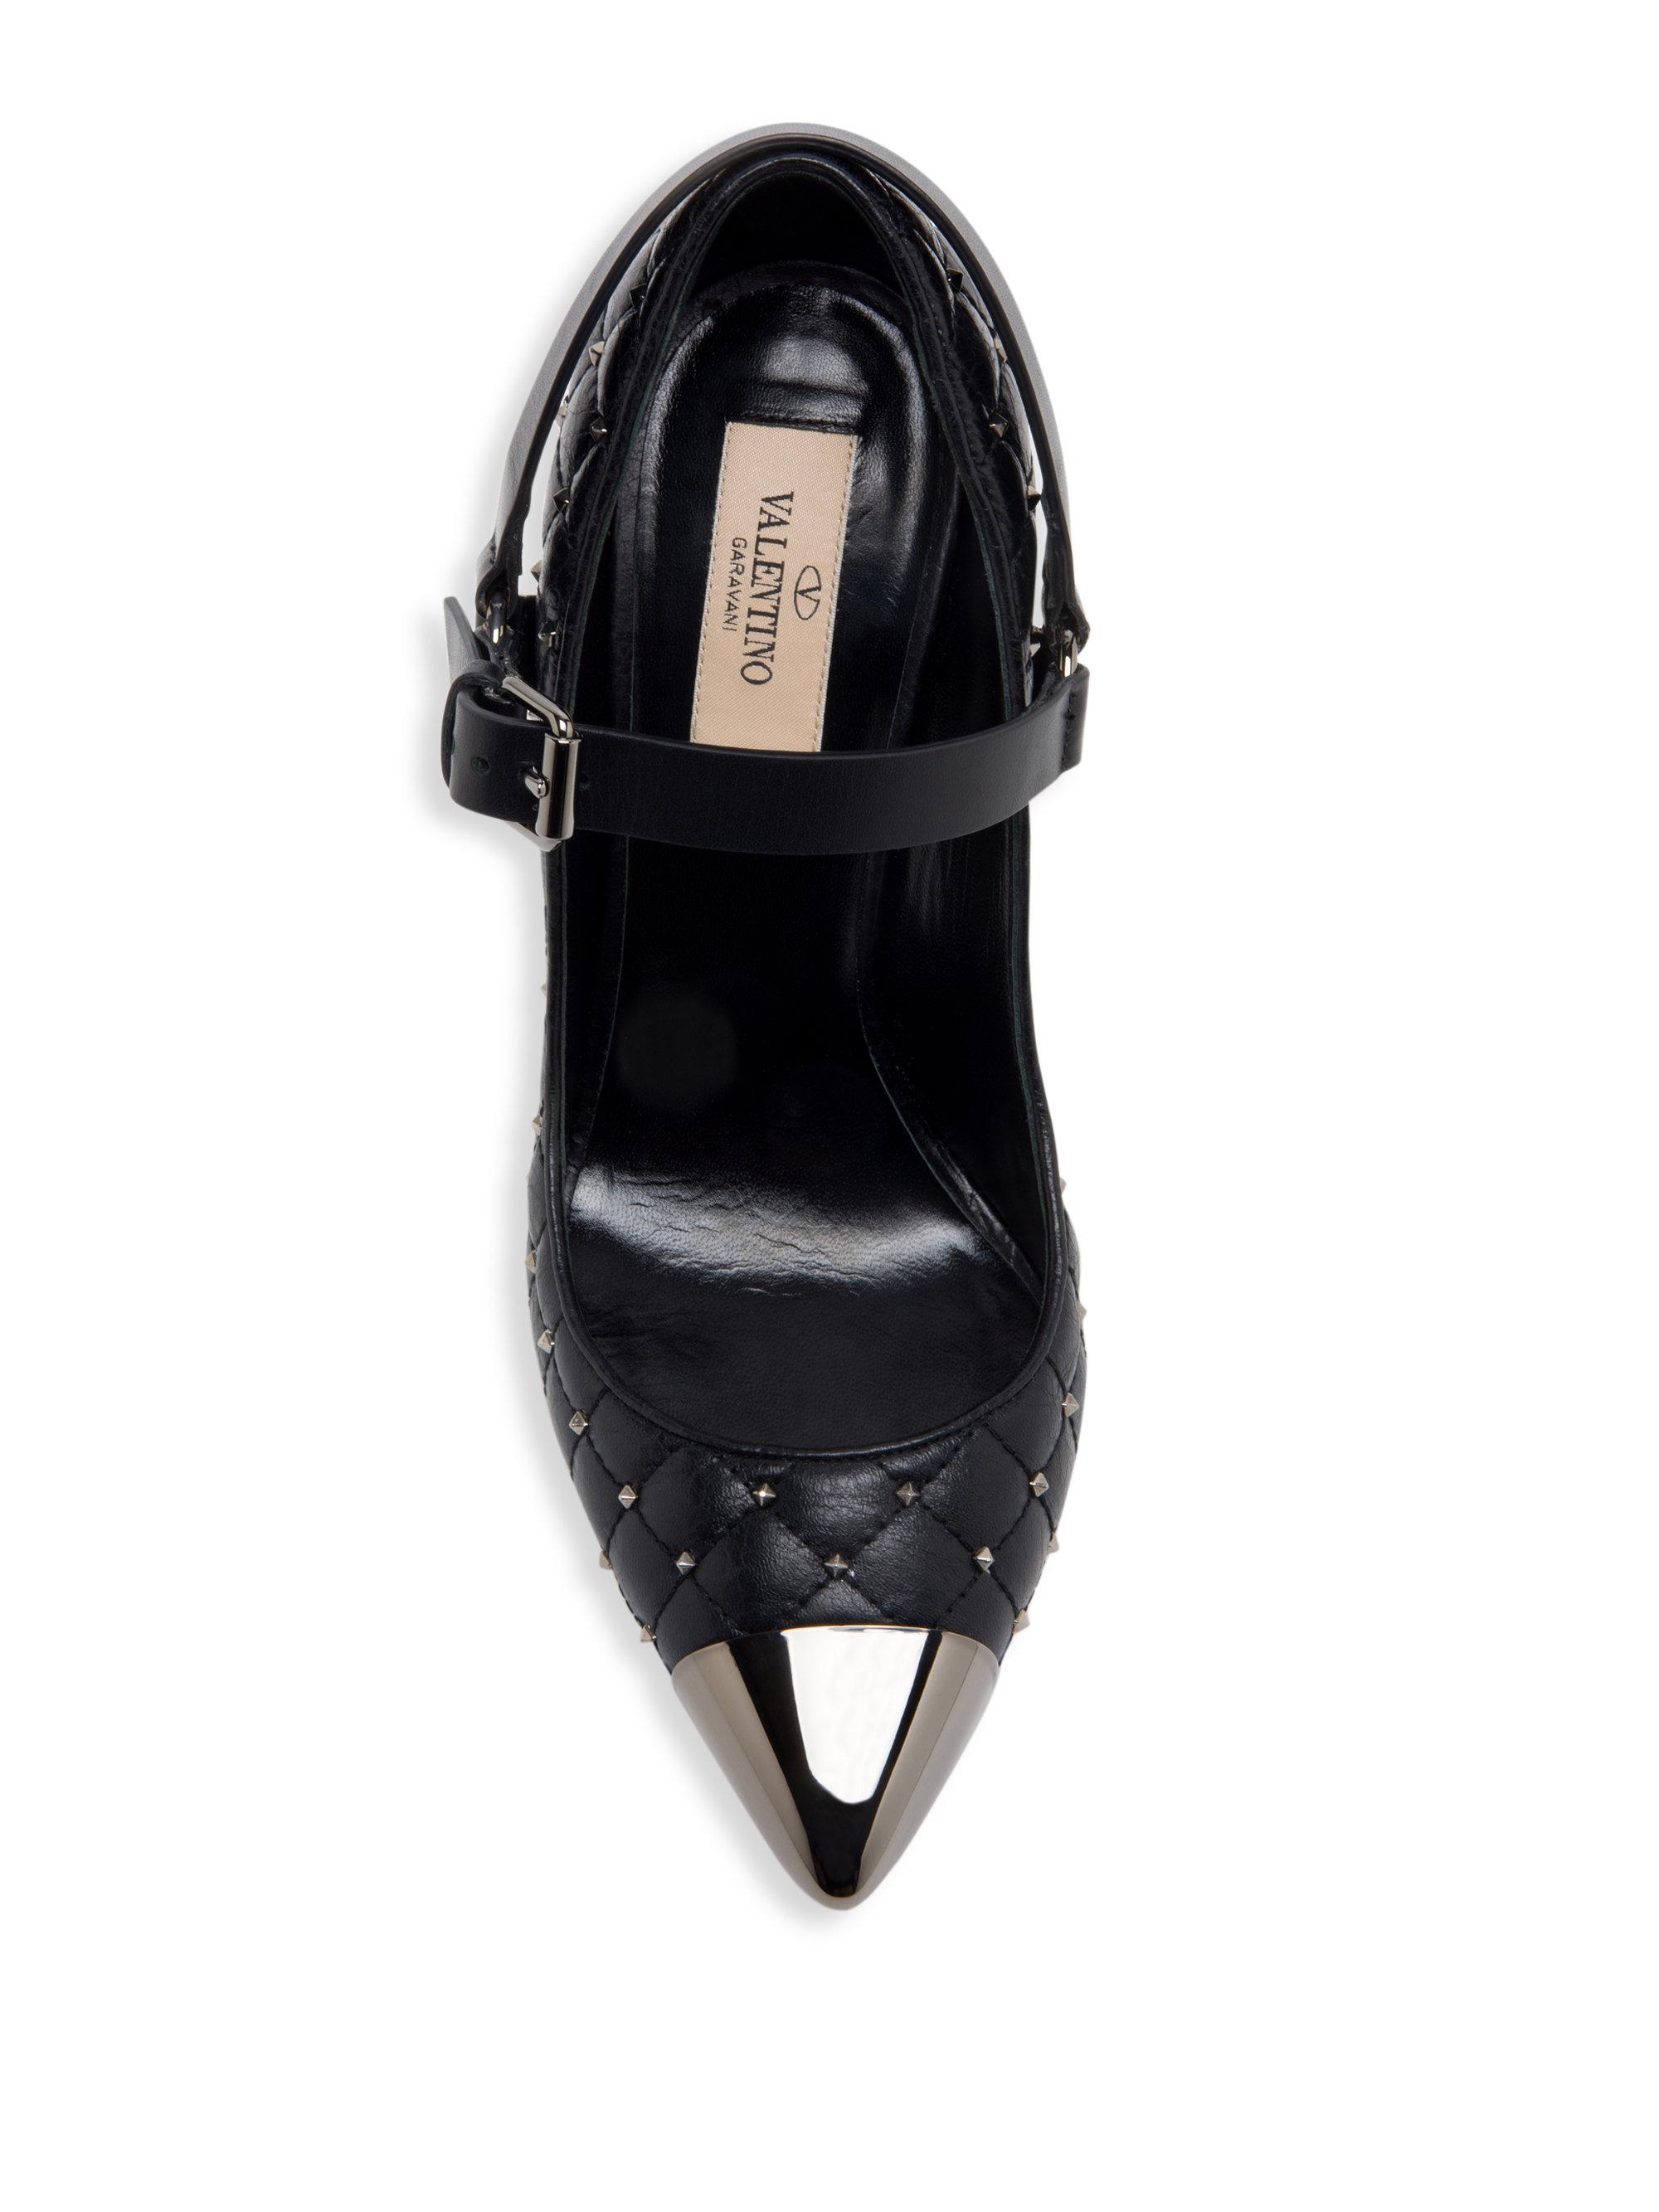 Lyst - Valentino Rockstud Spike Leather Cap Toe Mary Jane Pumps in Black